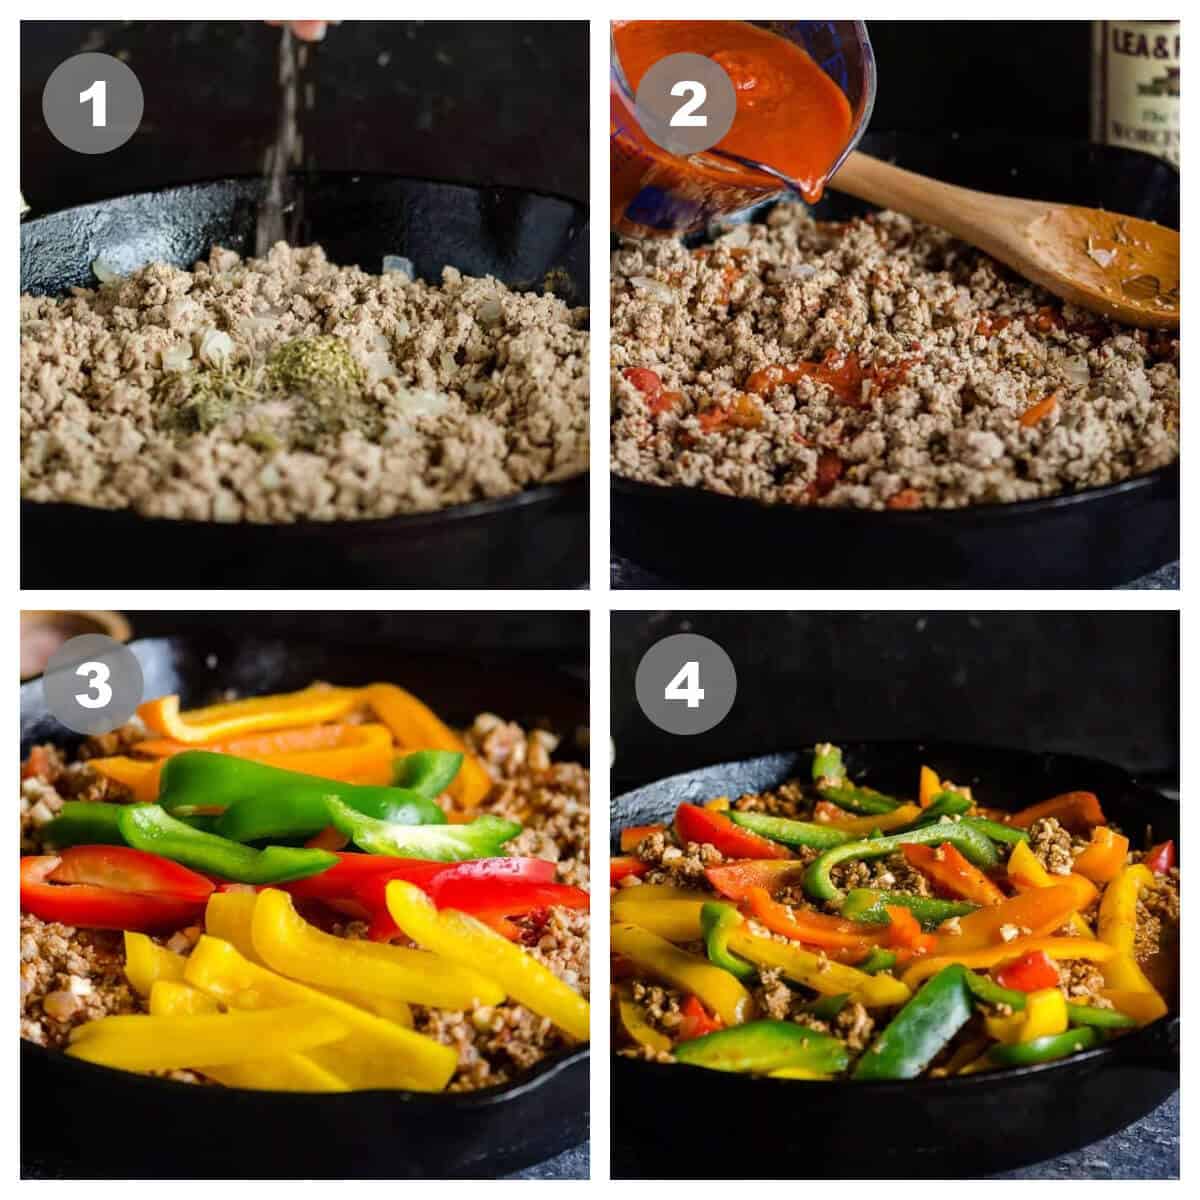 a collage of 4 photos showing steps to make unstuffed peppers; 1, browning meat/onions add spices; 2, adding sauce; 3, adding sliced peppers; 4, what it looks like after peppers are simmered.